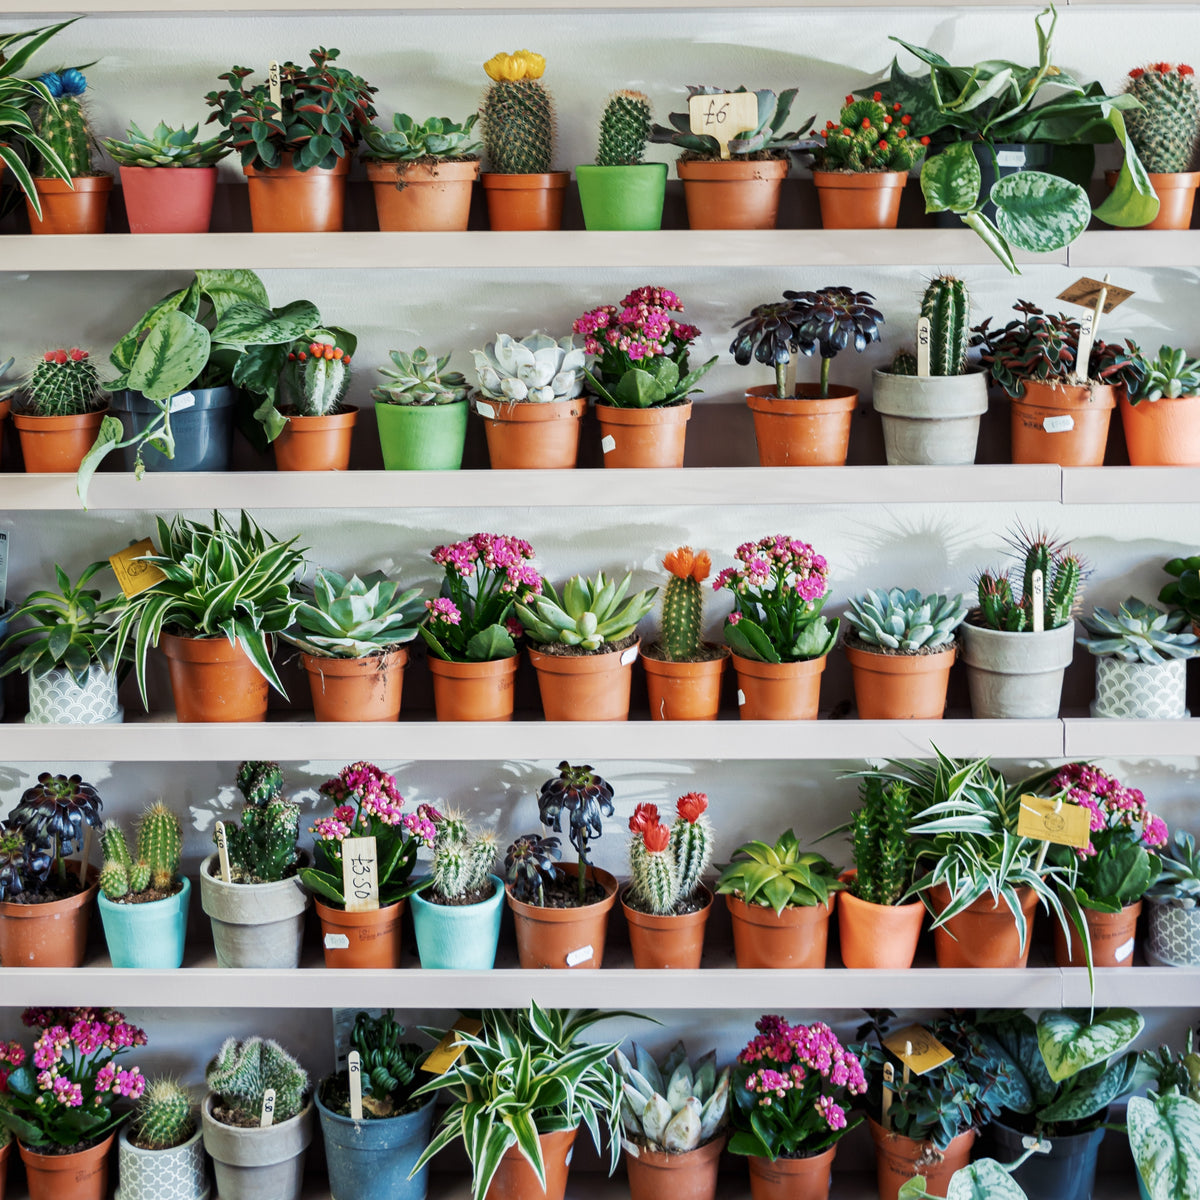 How indoor plants can improve your mental wellbeing